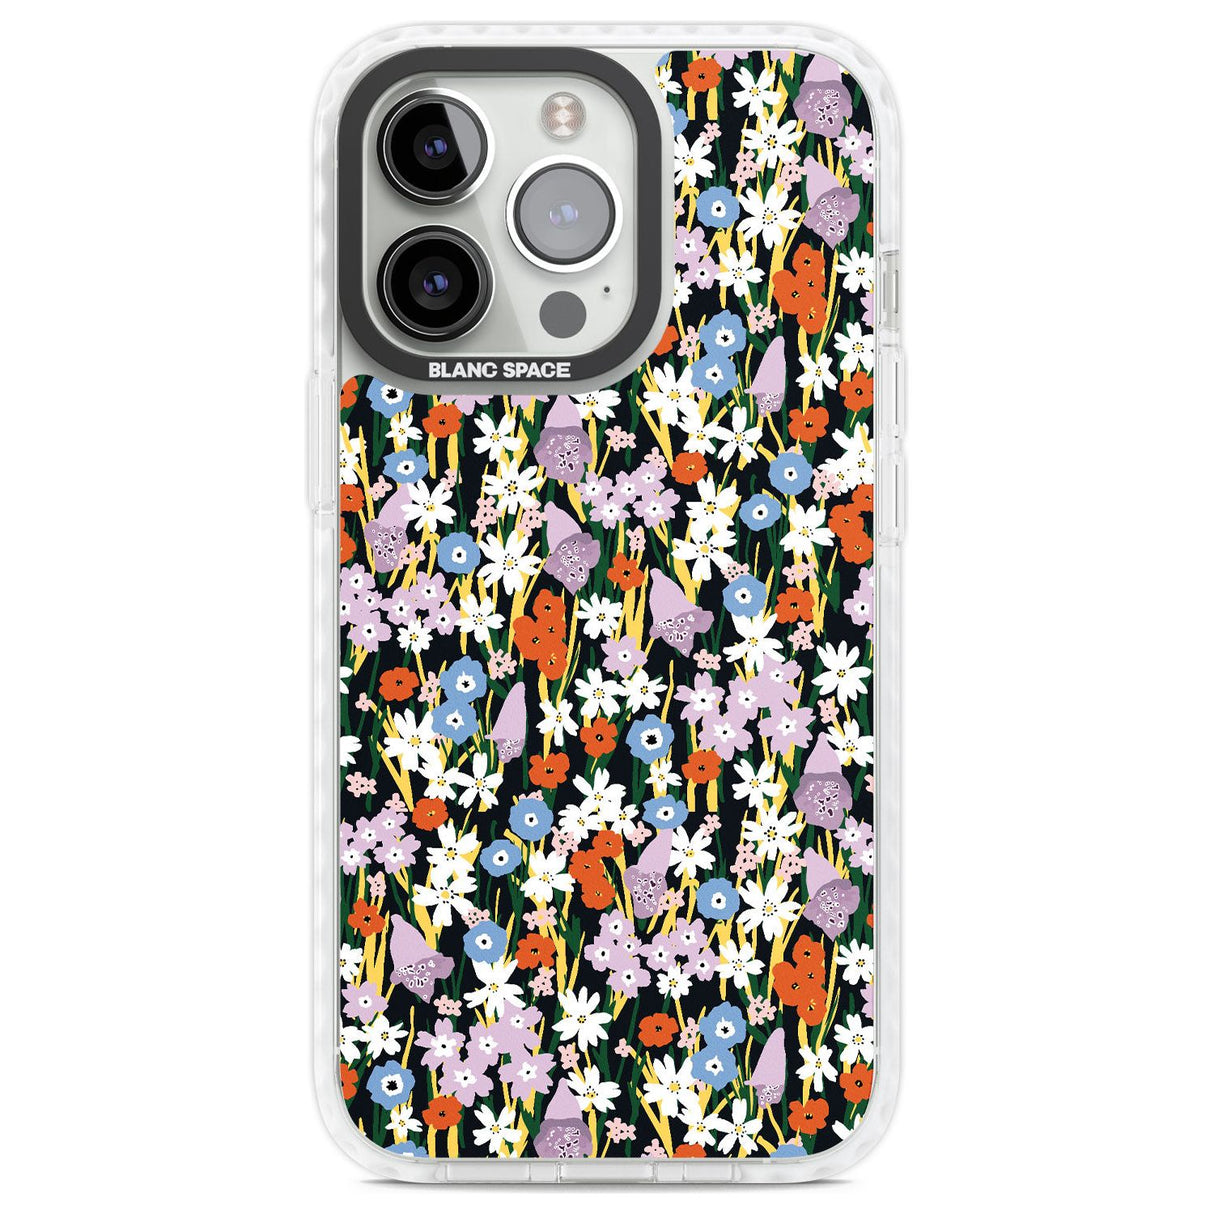 Energetic Floral Mix: Solid Phone Case iPhone 13 Pro / Impact Case,iPhone 14 Pro / Impact Case,iPhone 15 Pro Max / Impact Case,iPhone 15 Pro / Impact Case Blanc Space